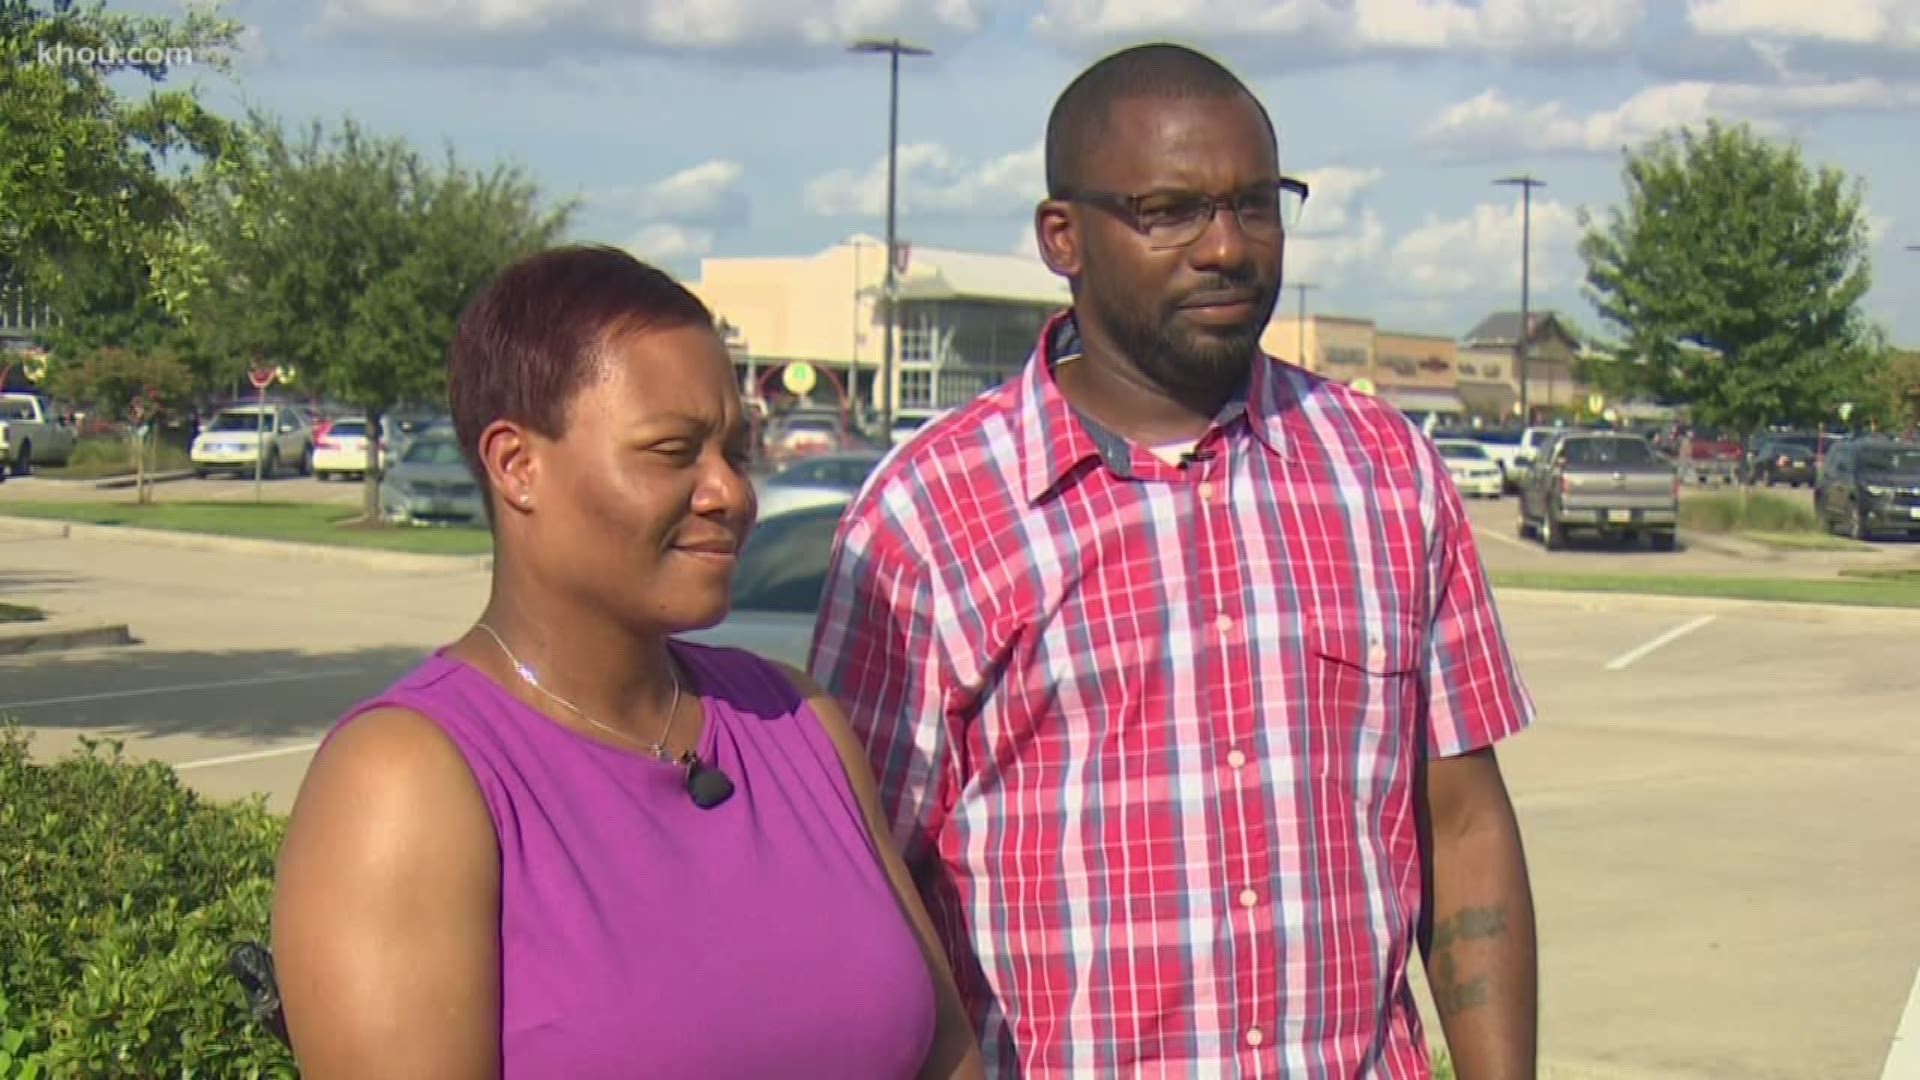 A Cypress couple who are both disabled veterans were shocked when someone put a racist note on their car while they shopped at an HEB.